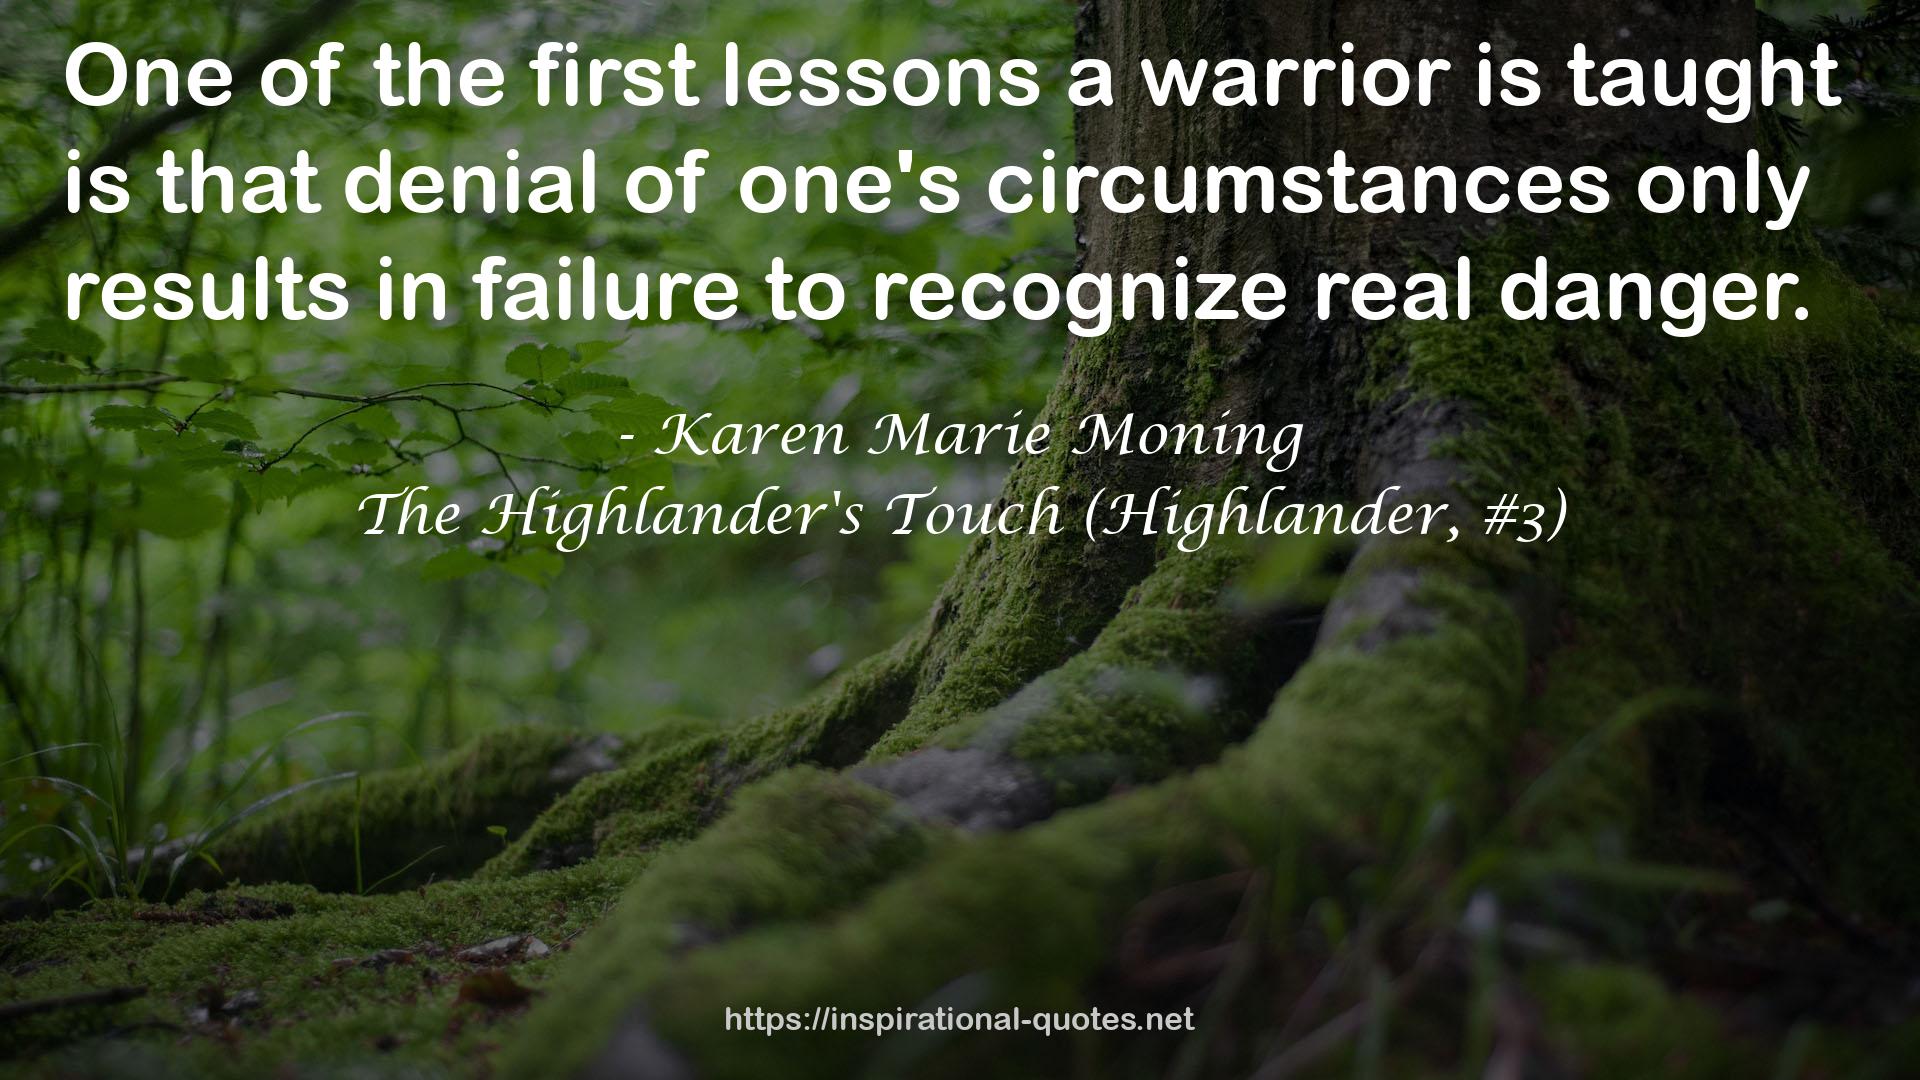 The Highlander's Touch (Highlander, #3) QUOTES